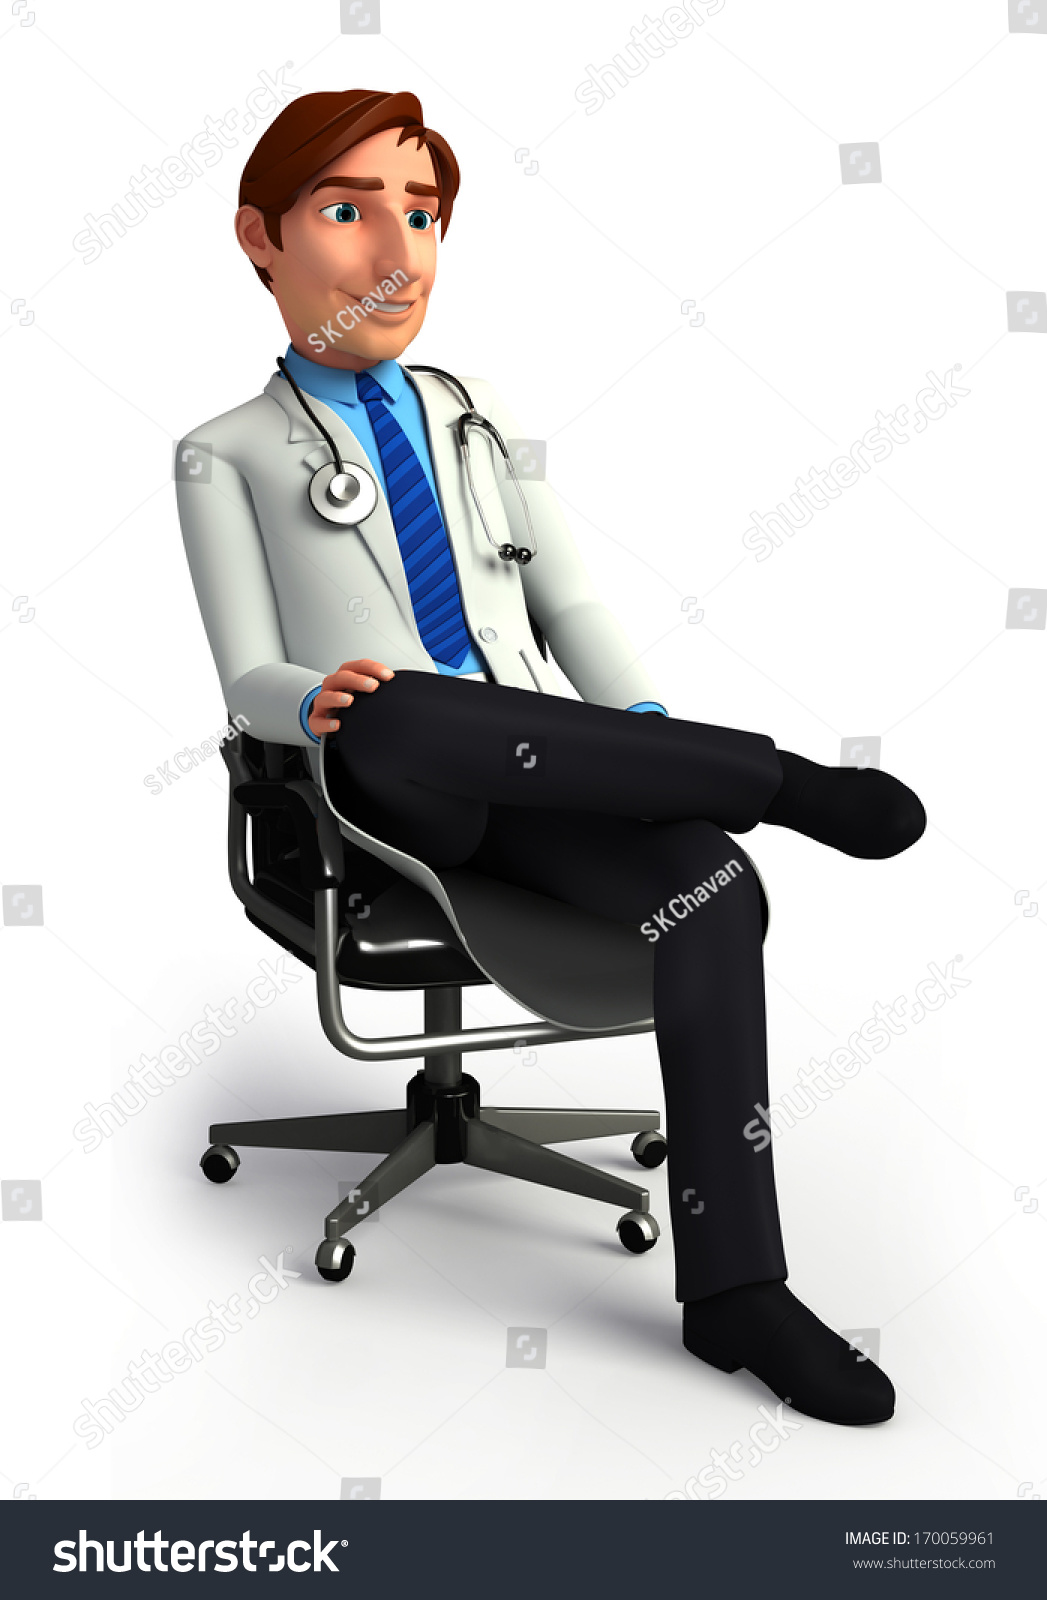 Doctor Sitting On The Chair Stock Photo 170059961 : Shutterstock